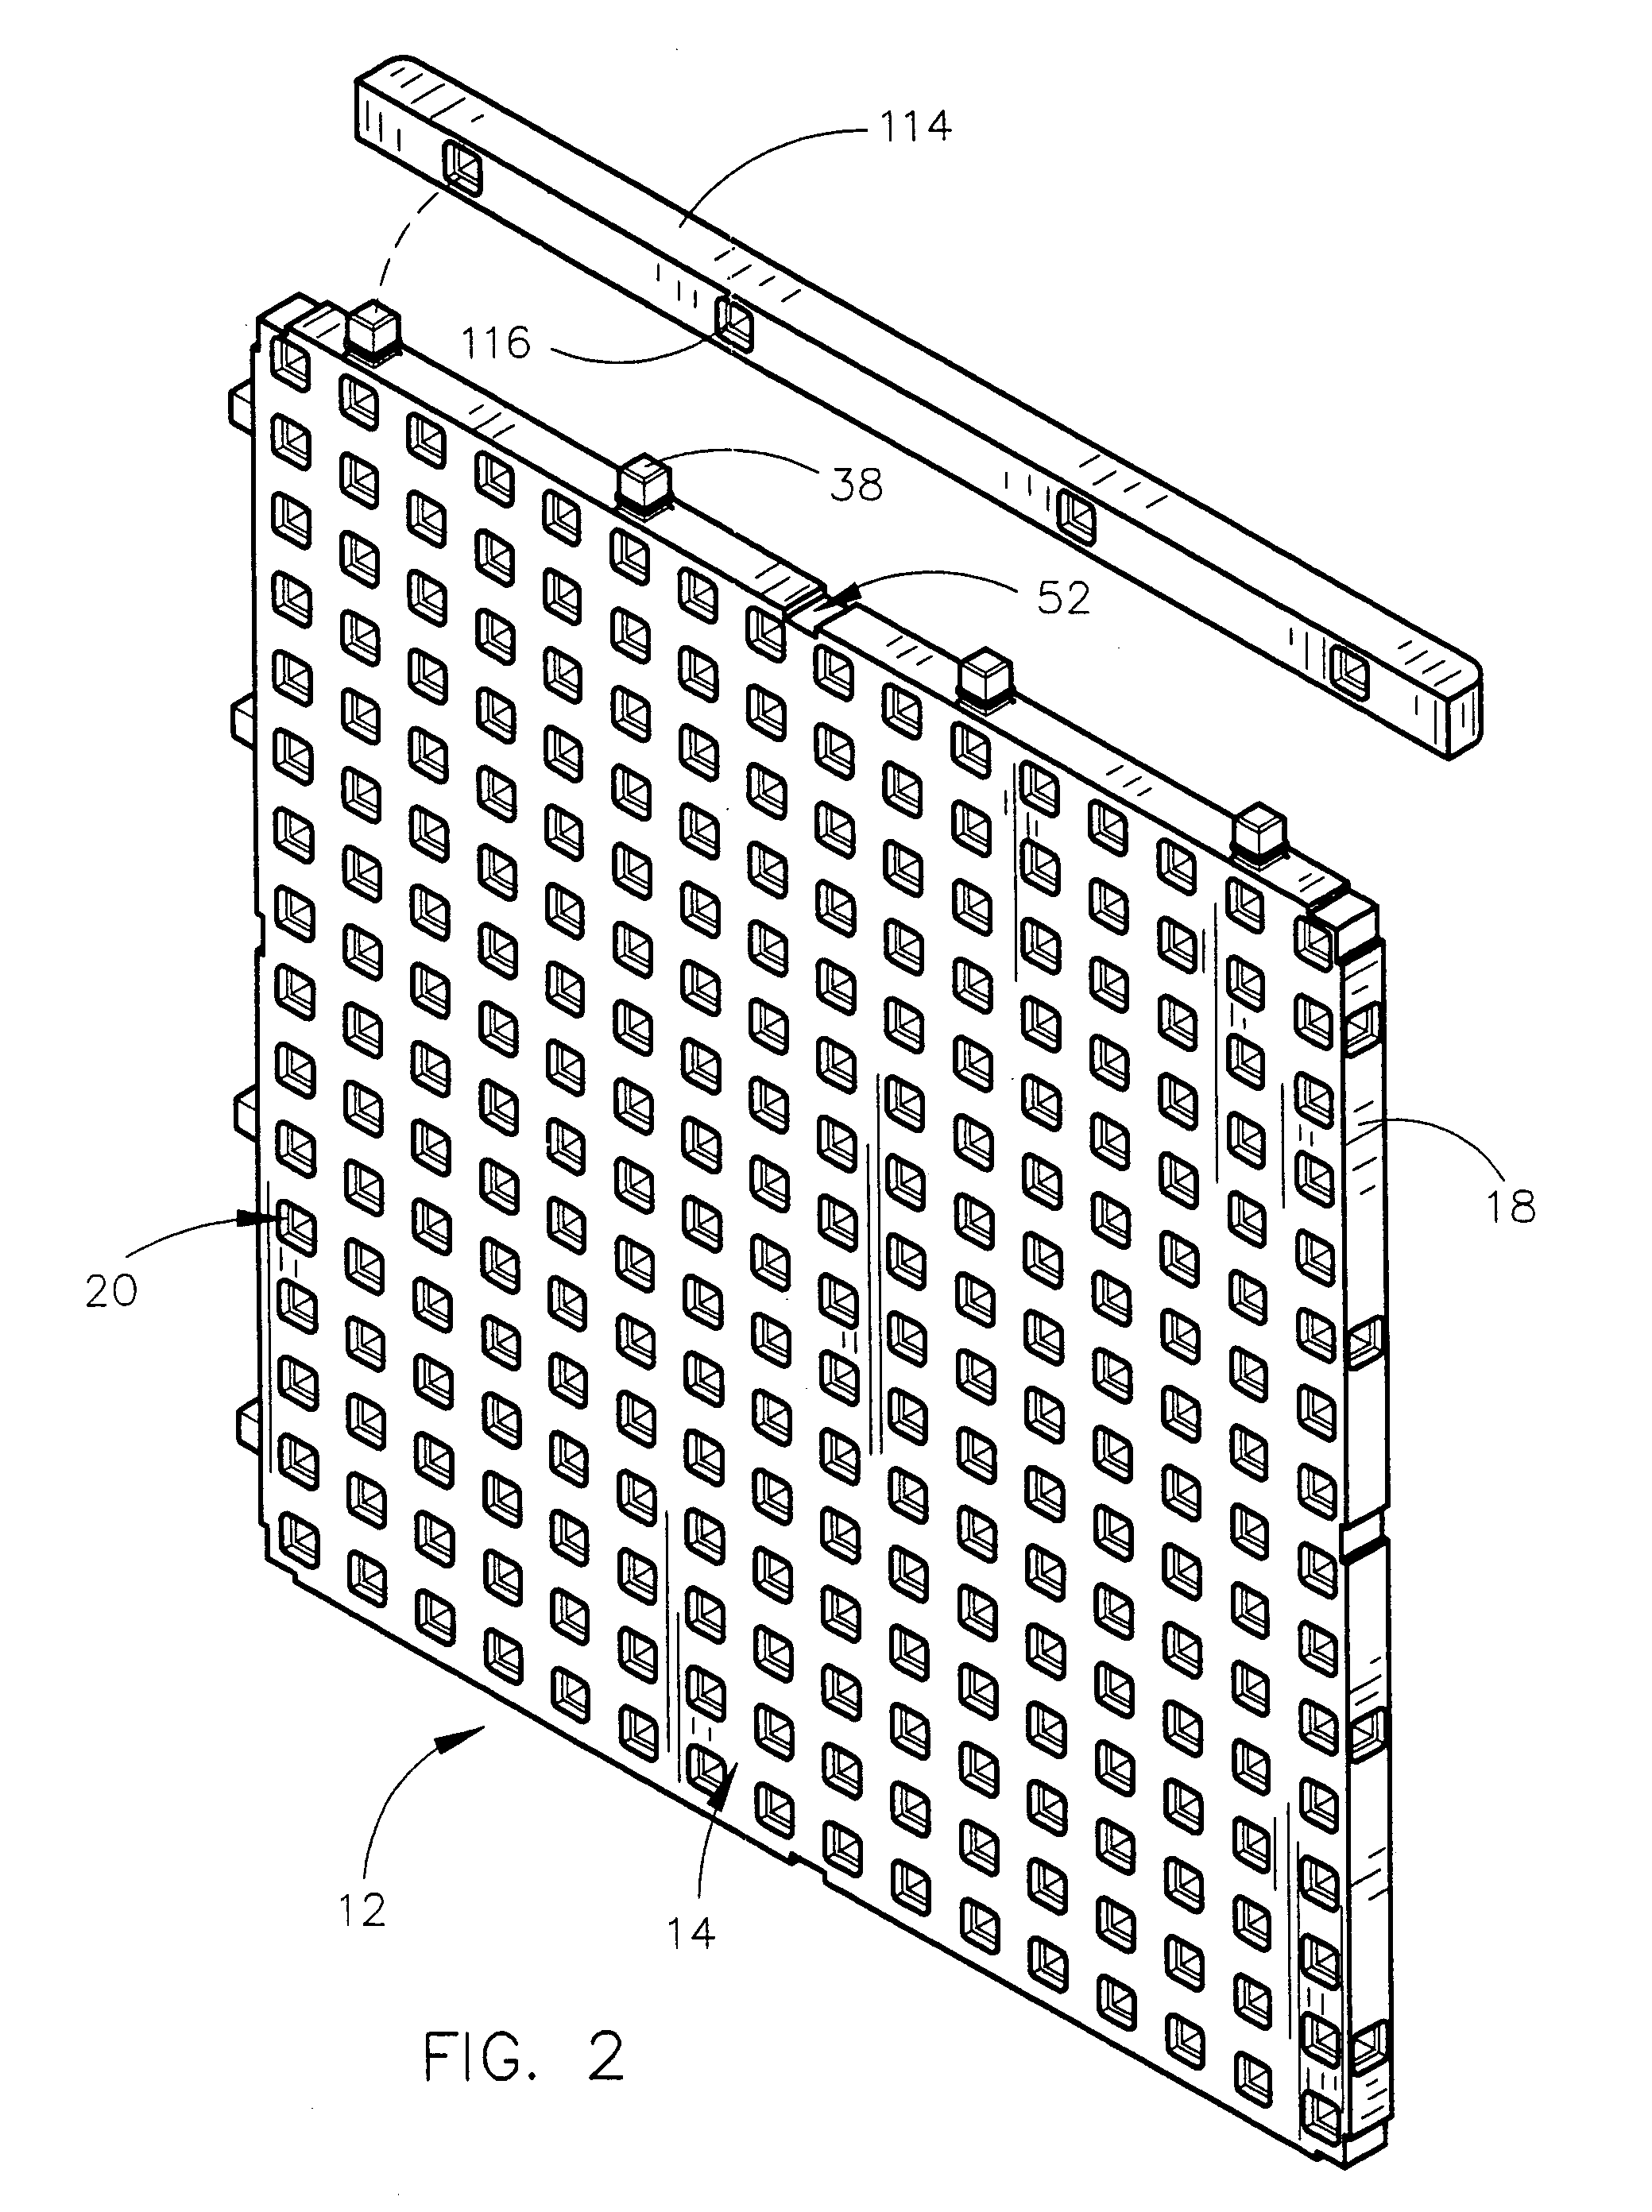 Storage and organization system for articles